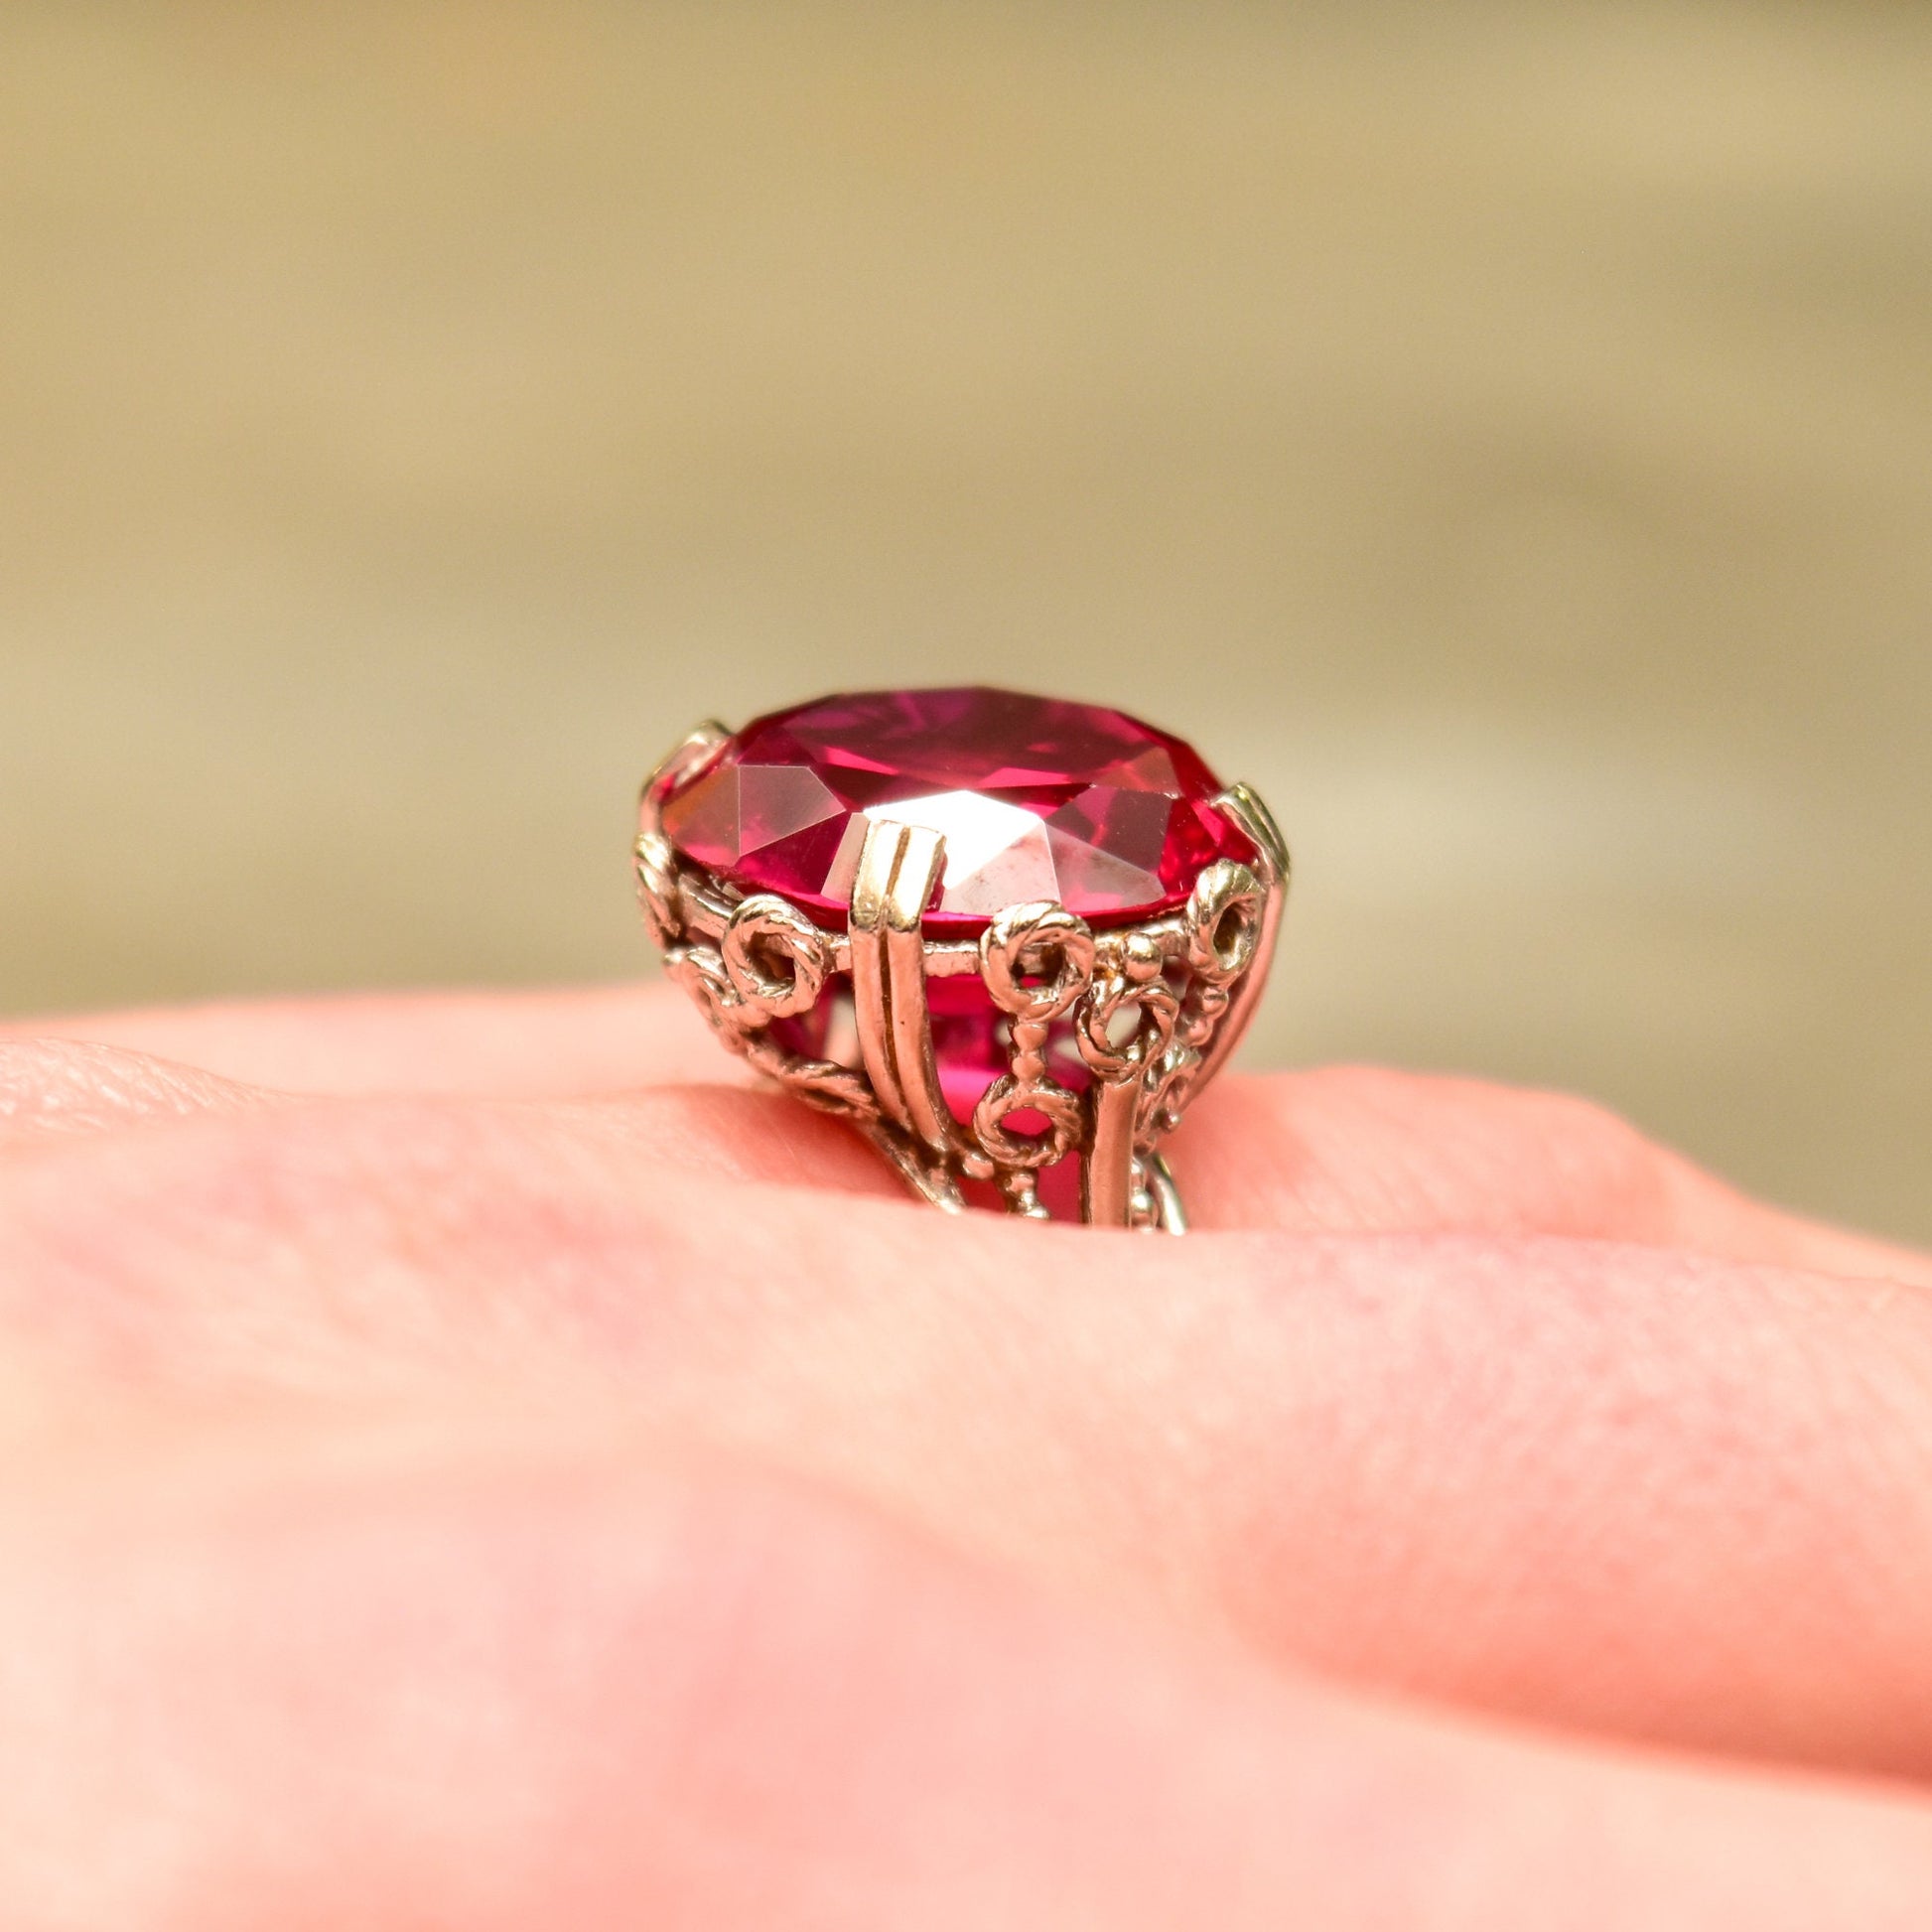 10K white gold pink synthetic ruby cocktail ring with ornate filigree setting, Art Deco style, size 6 3/4 US, displayed on an open hand